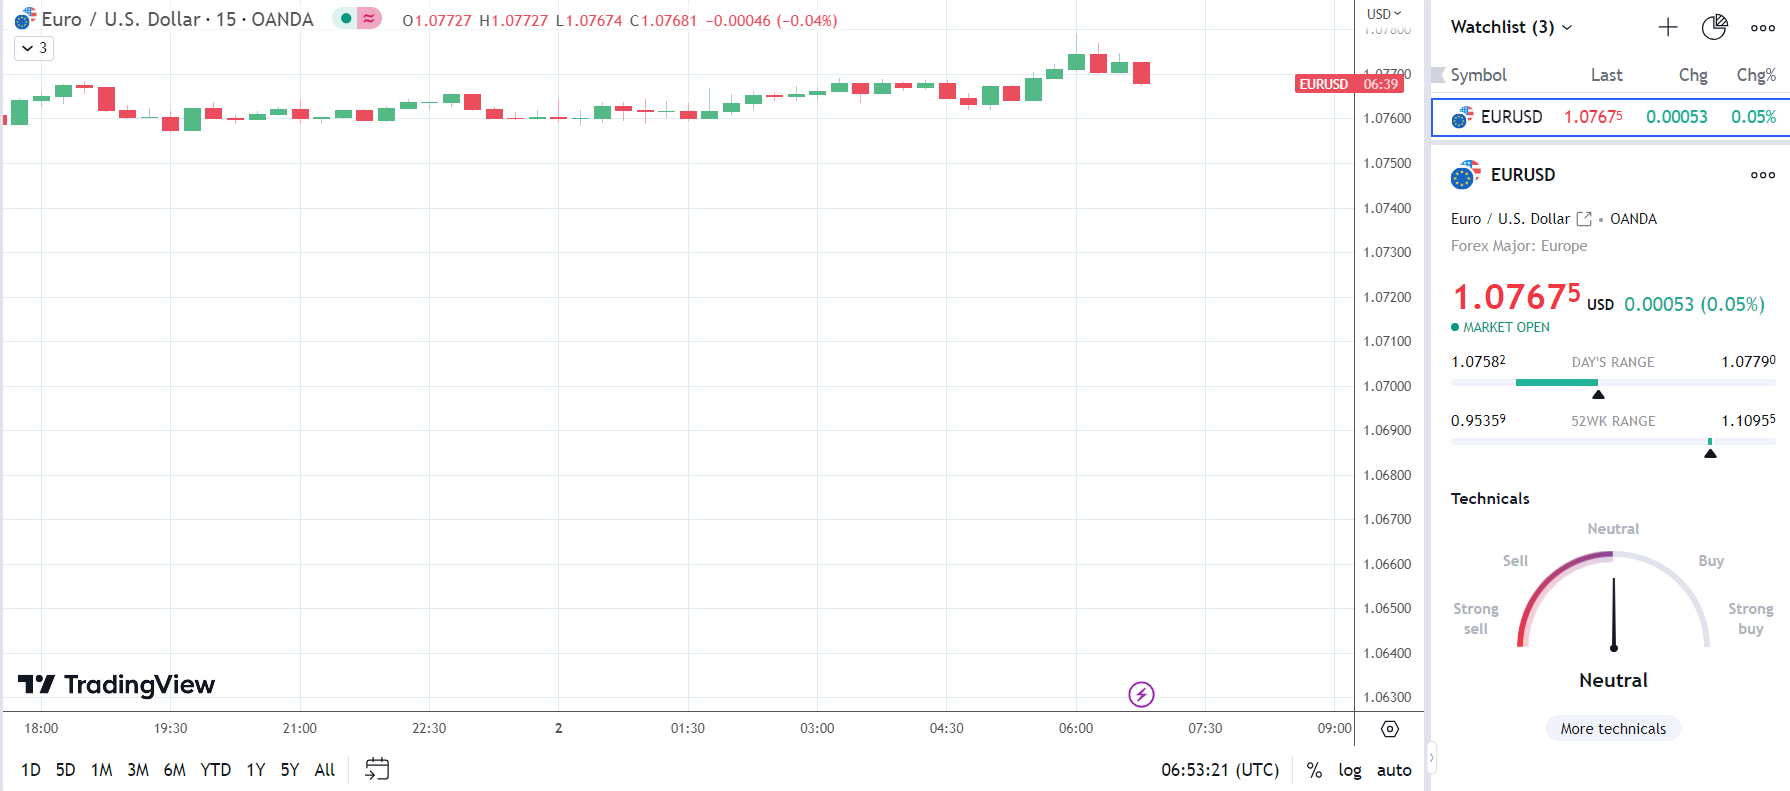 EUR/USD falls in response to French industrial production numbers.